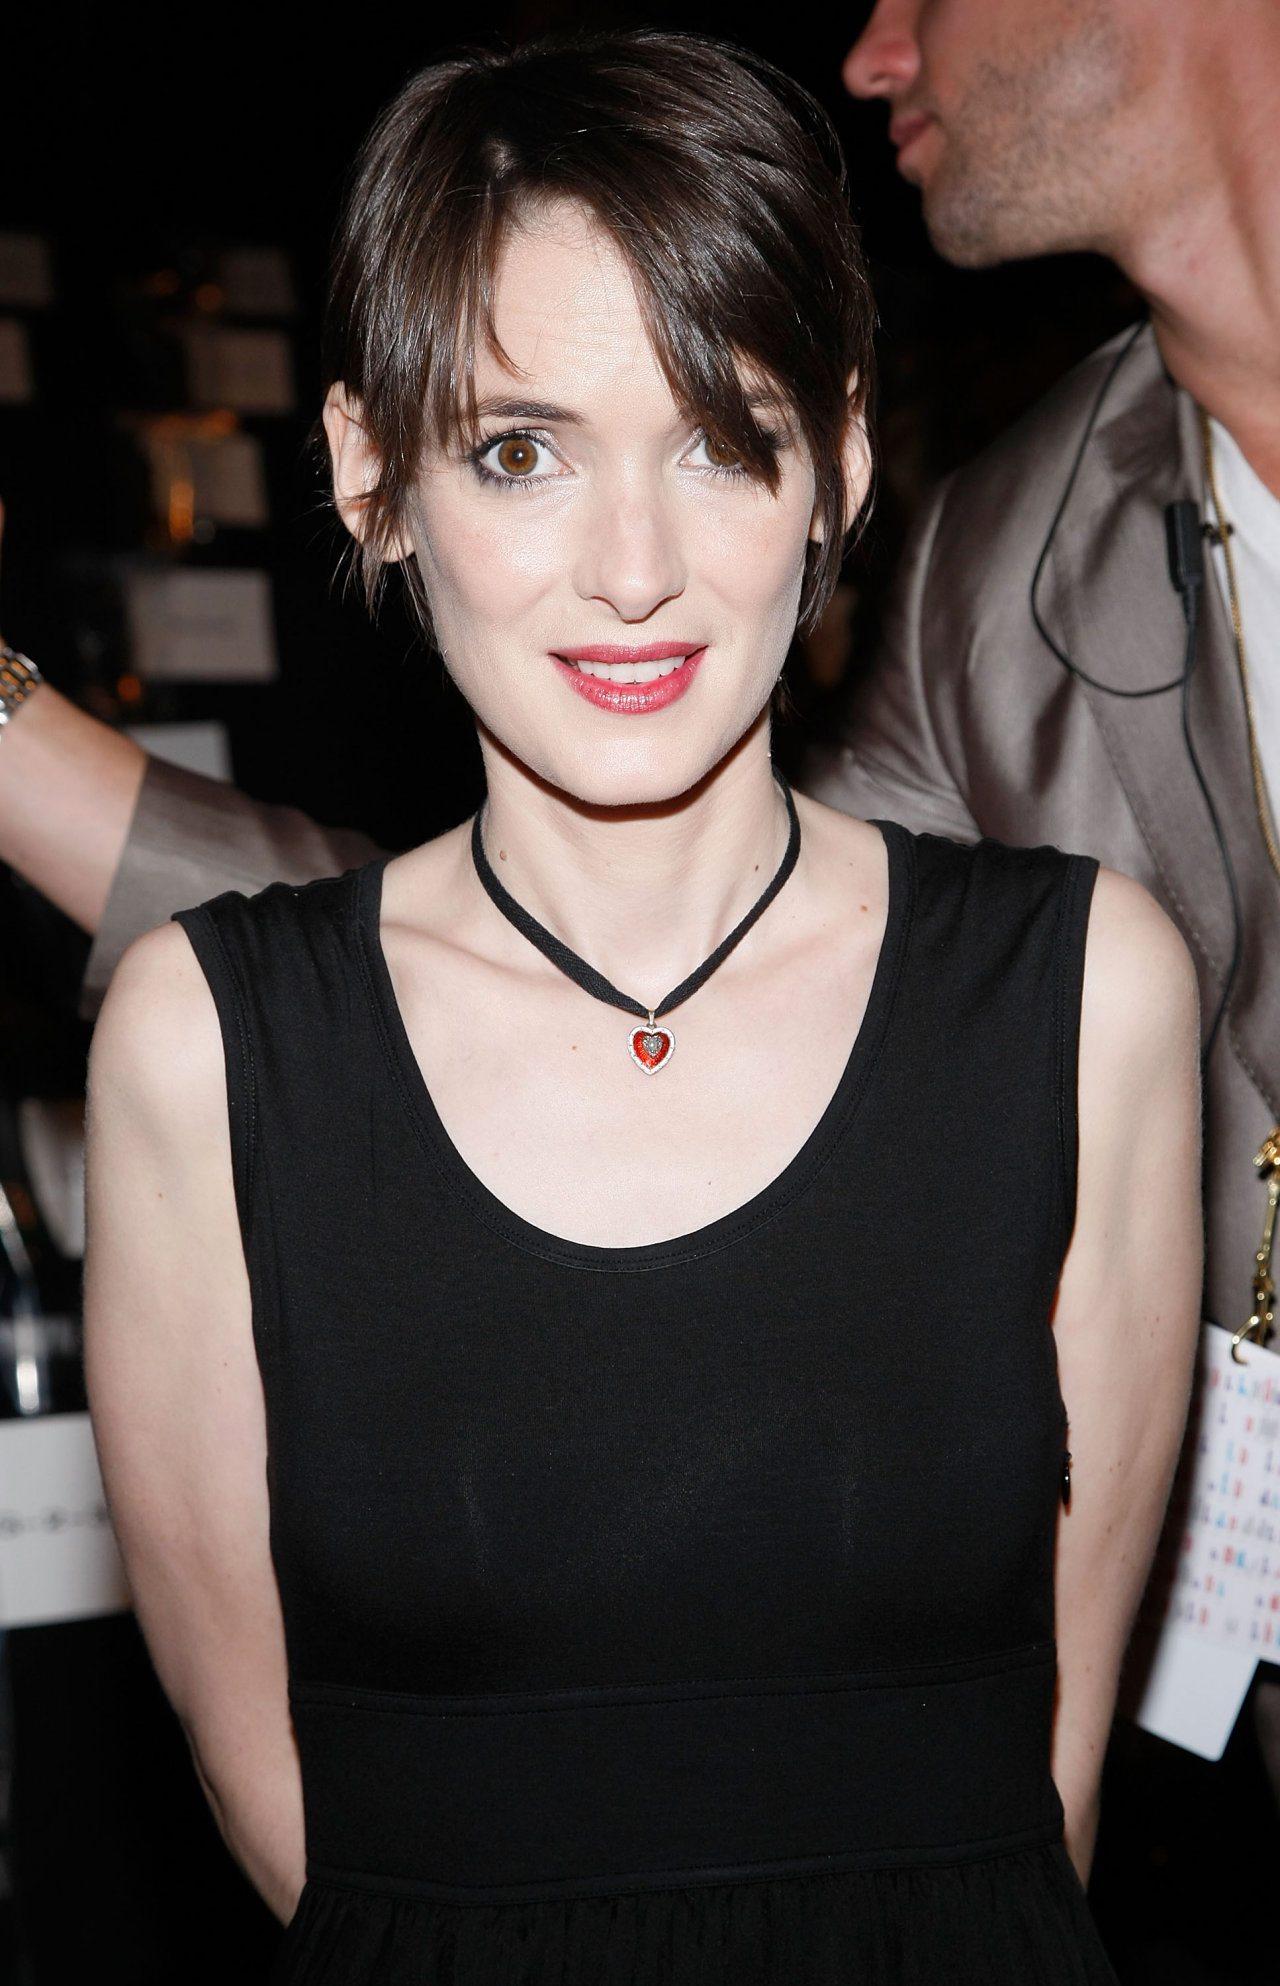 Winona Ryder - Winona Ryder 20 Years Old - HD Wallpaper 